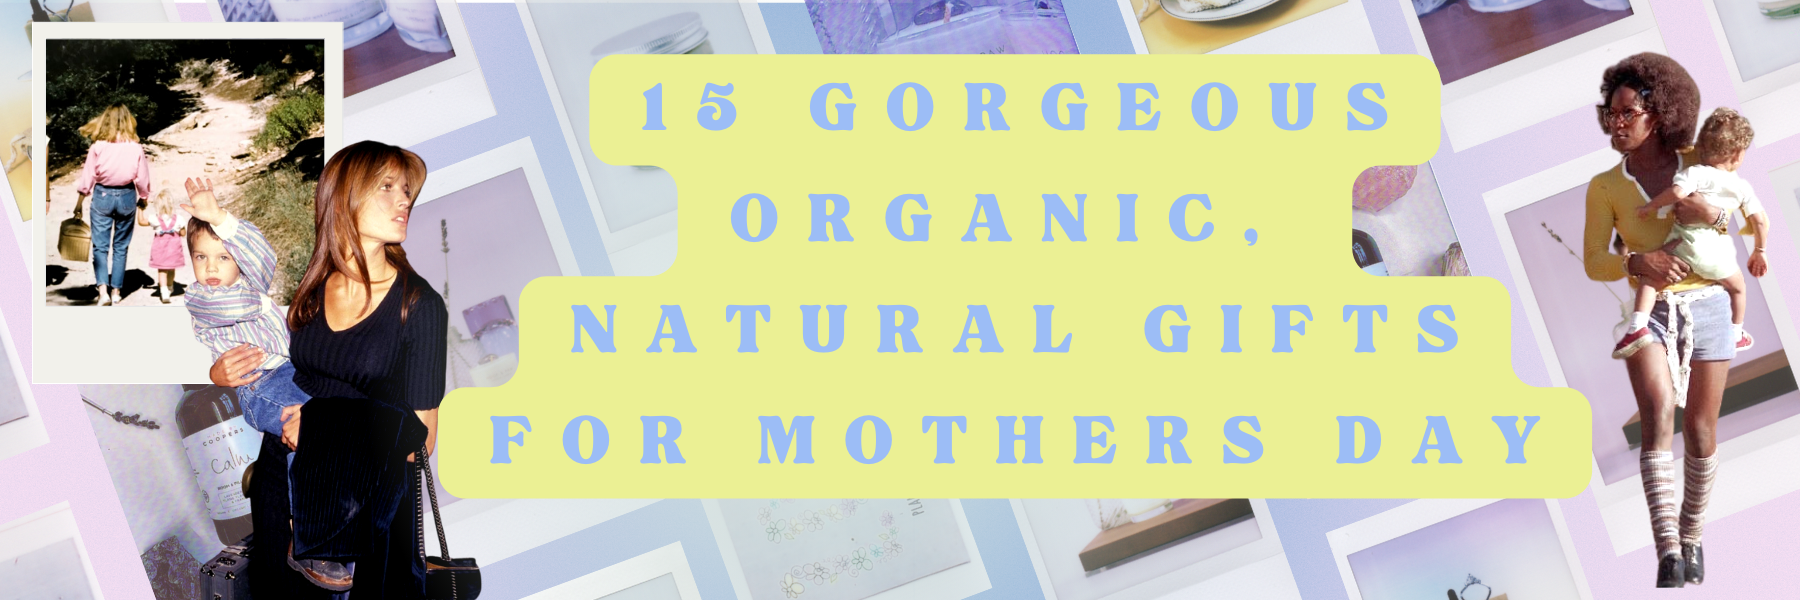 Eco-Friendly Mother's Day Gift Ideas - Umbel Organics